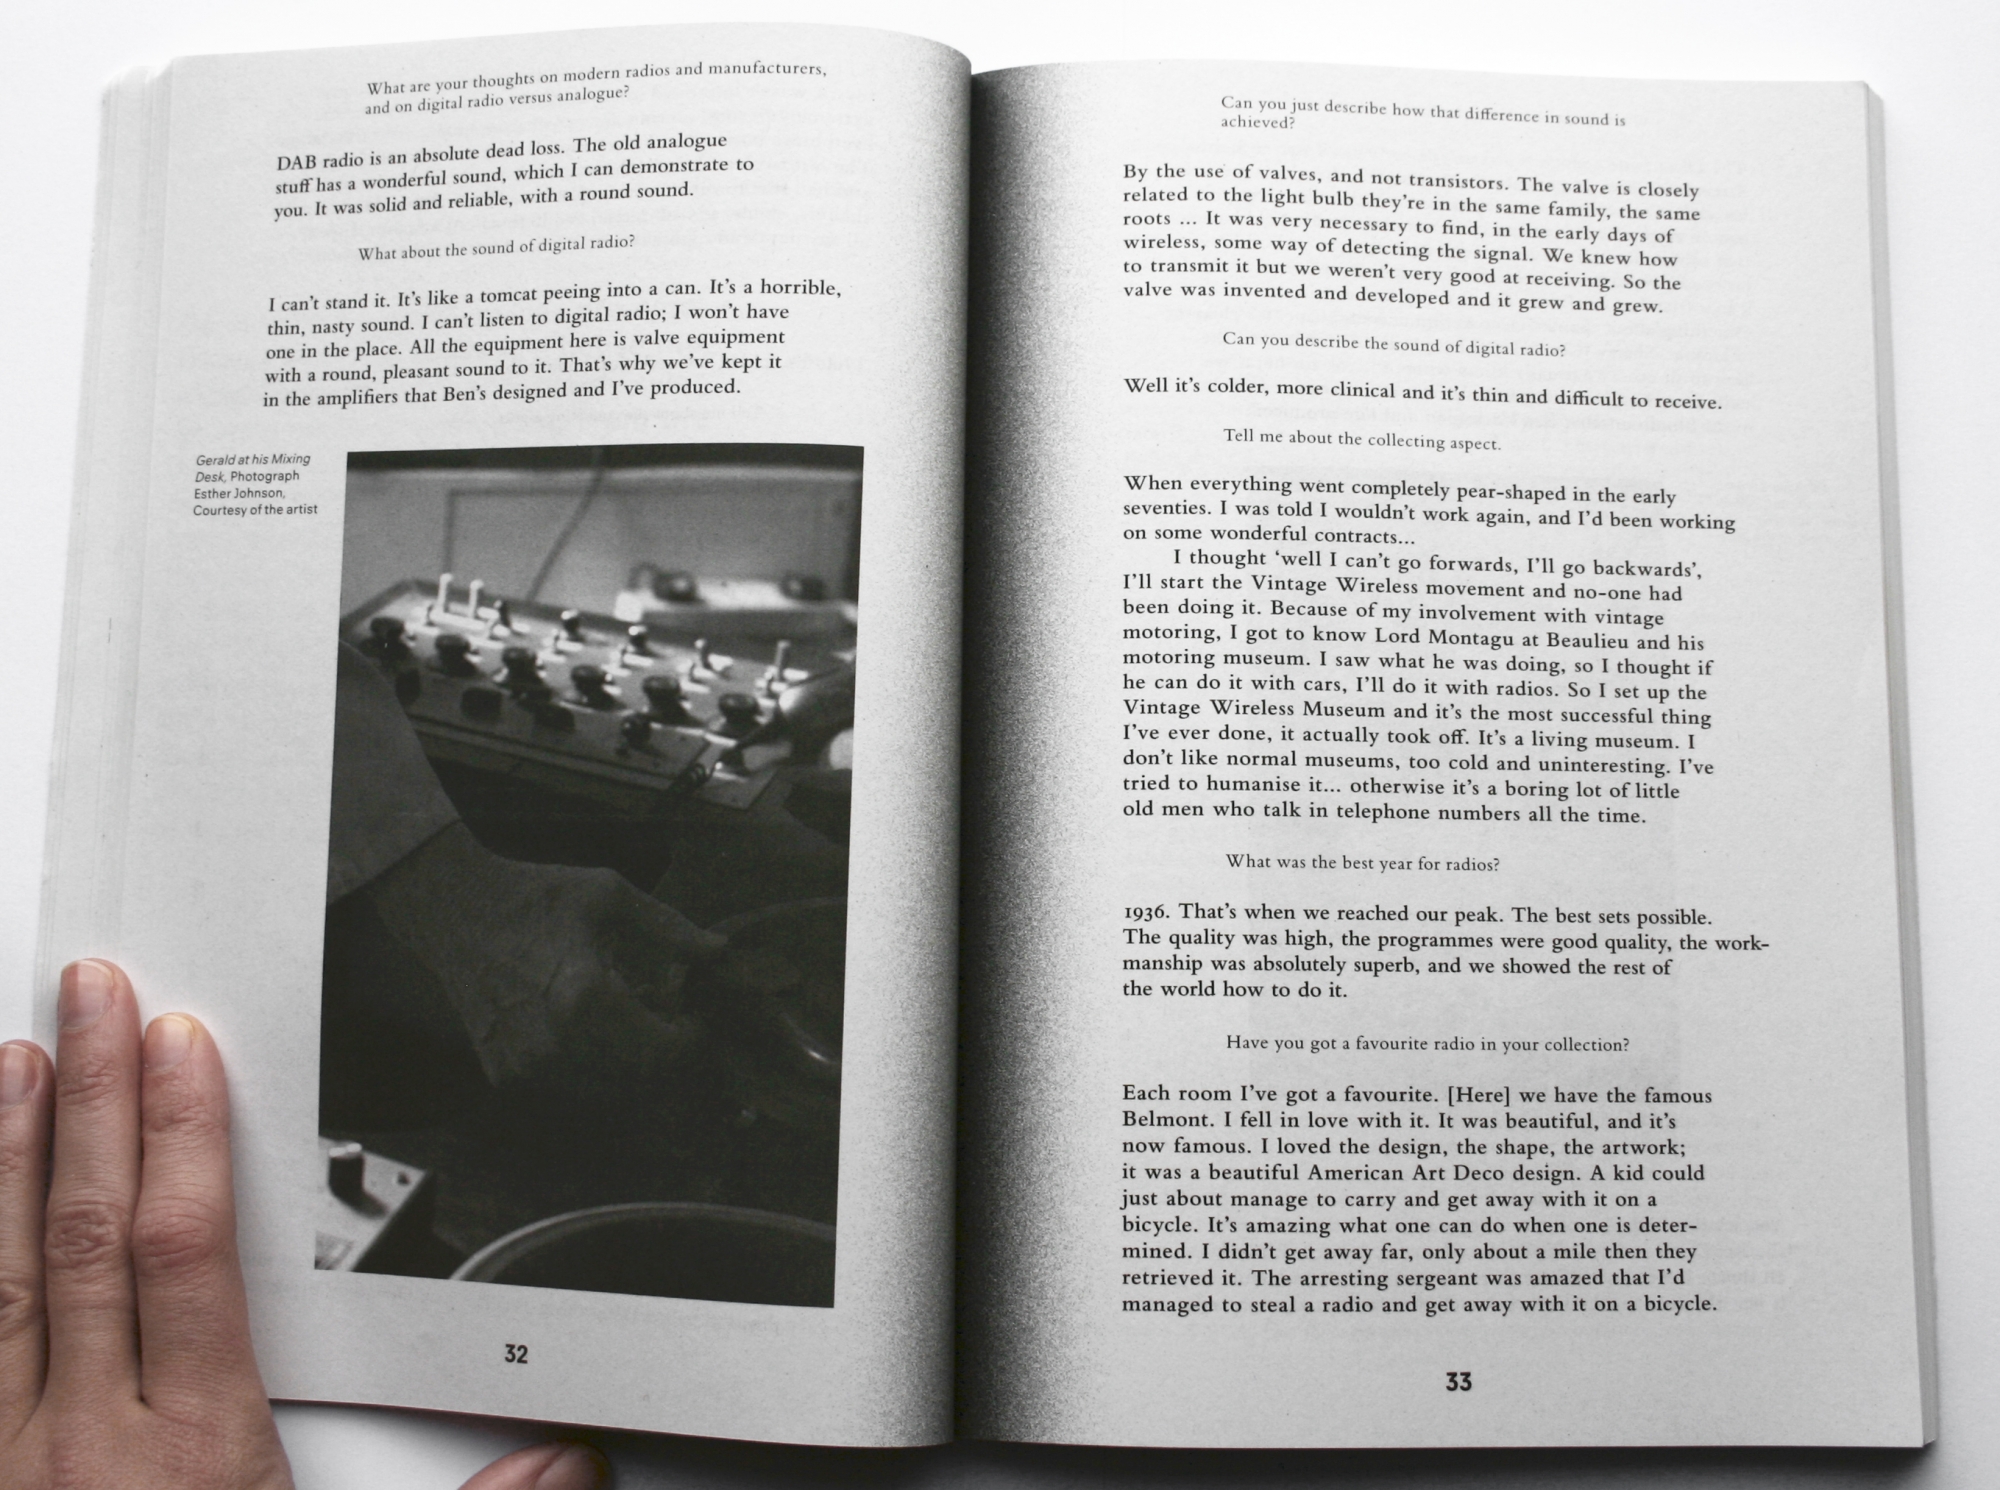 Cut & Splice: Transmission book including chapter by Esther Johnson